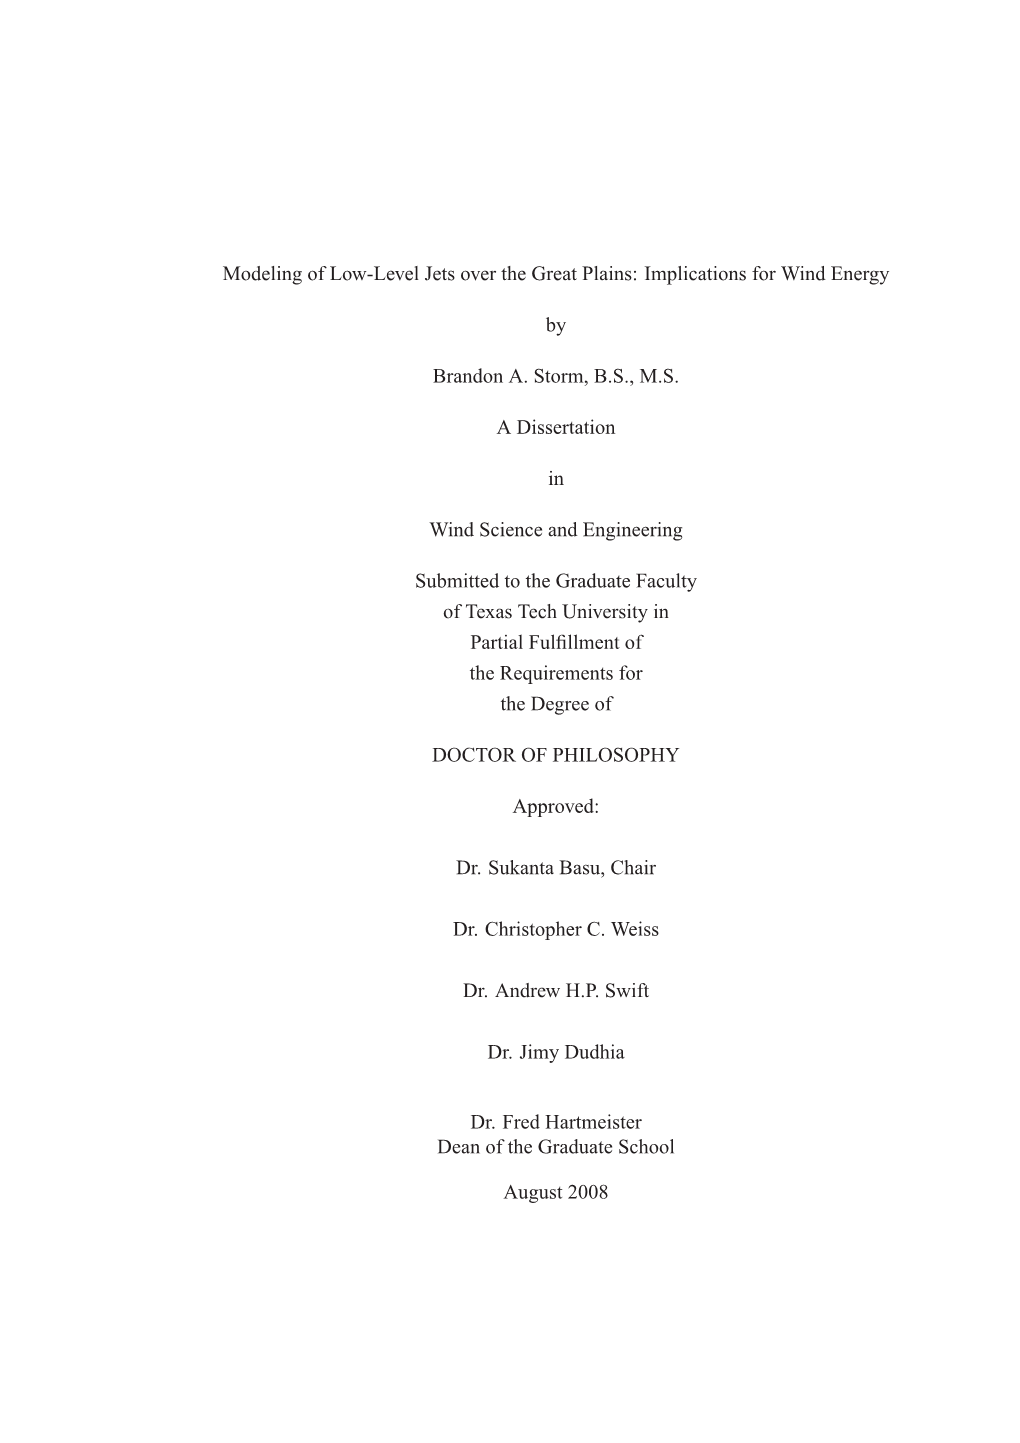 Modeling of Low-Level Jets Over the Great Plains: Implications for Wind Energy by Brandon A. Storm, B.S., M.S. a Dissertation In